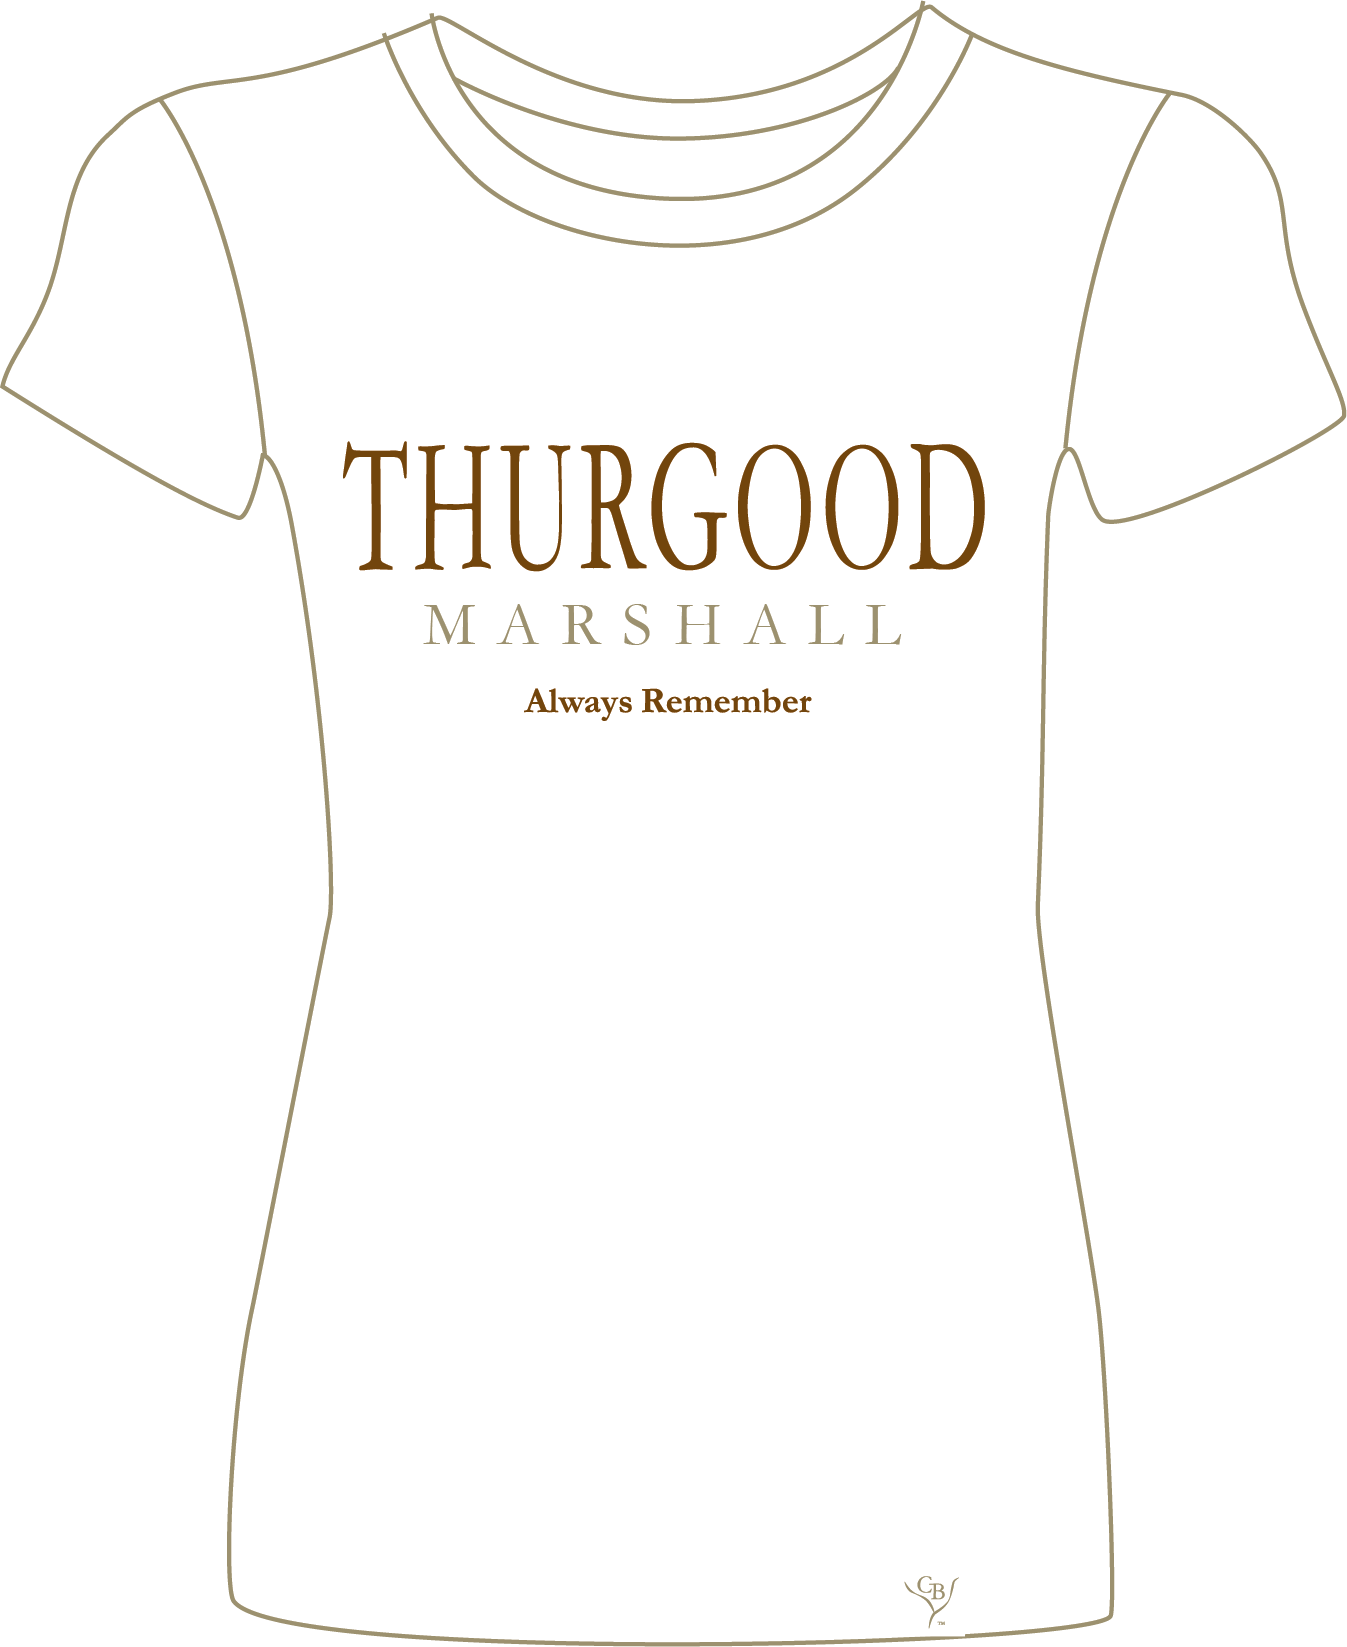 The Thurgood W